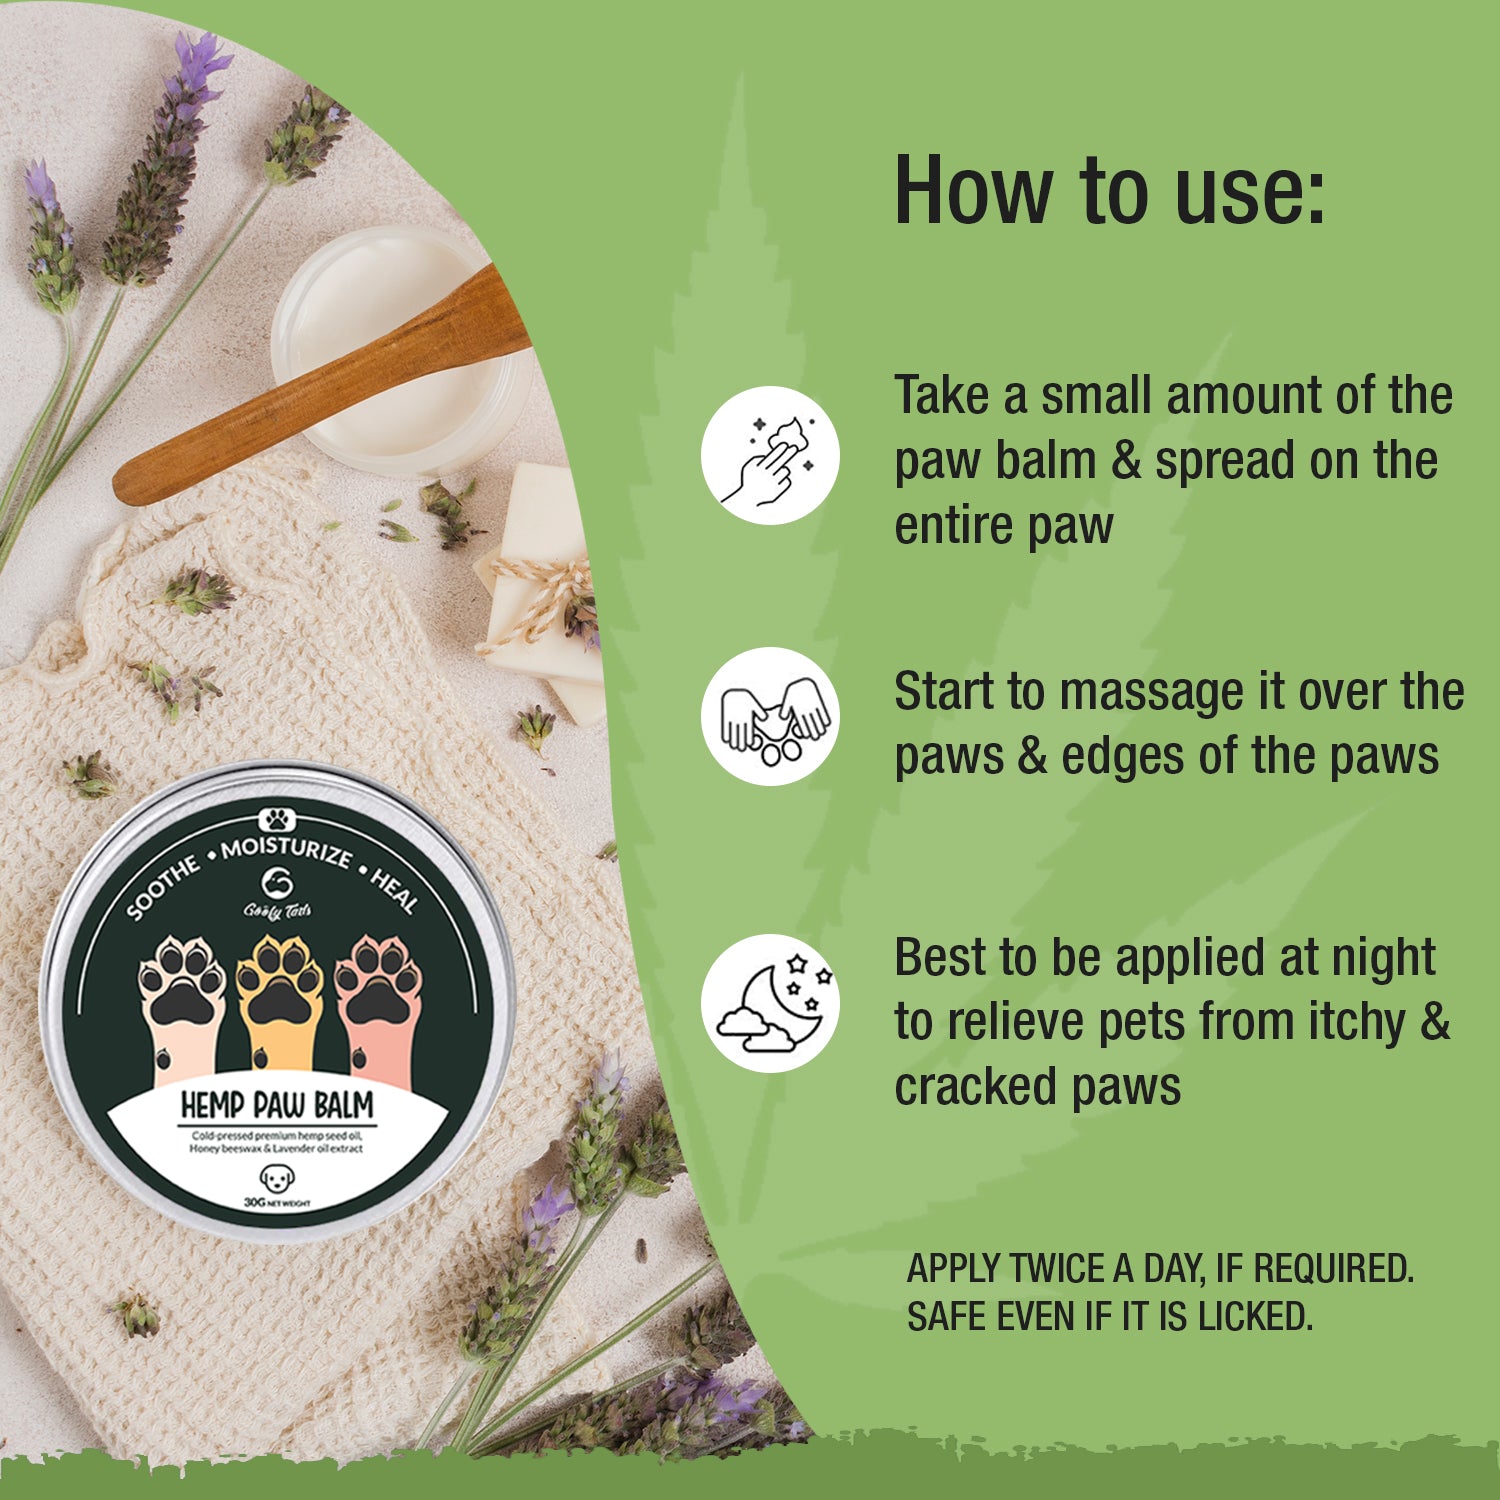 How to use hemp paw cream on dogs and puppies paws